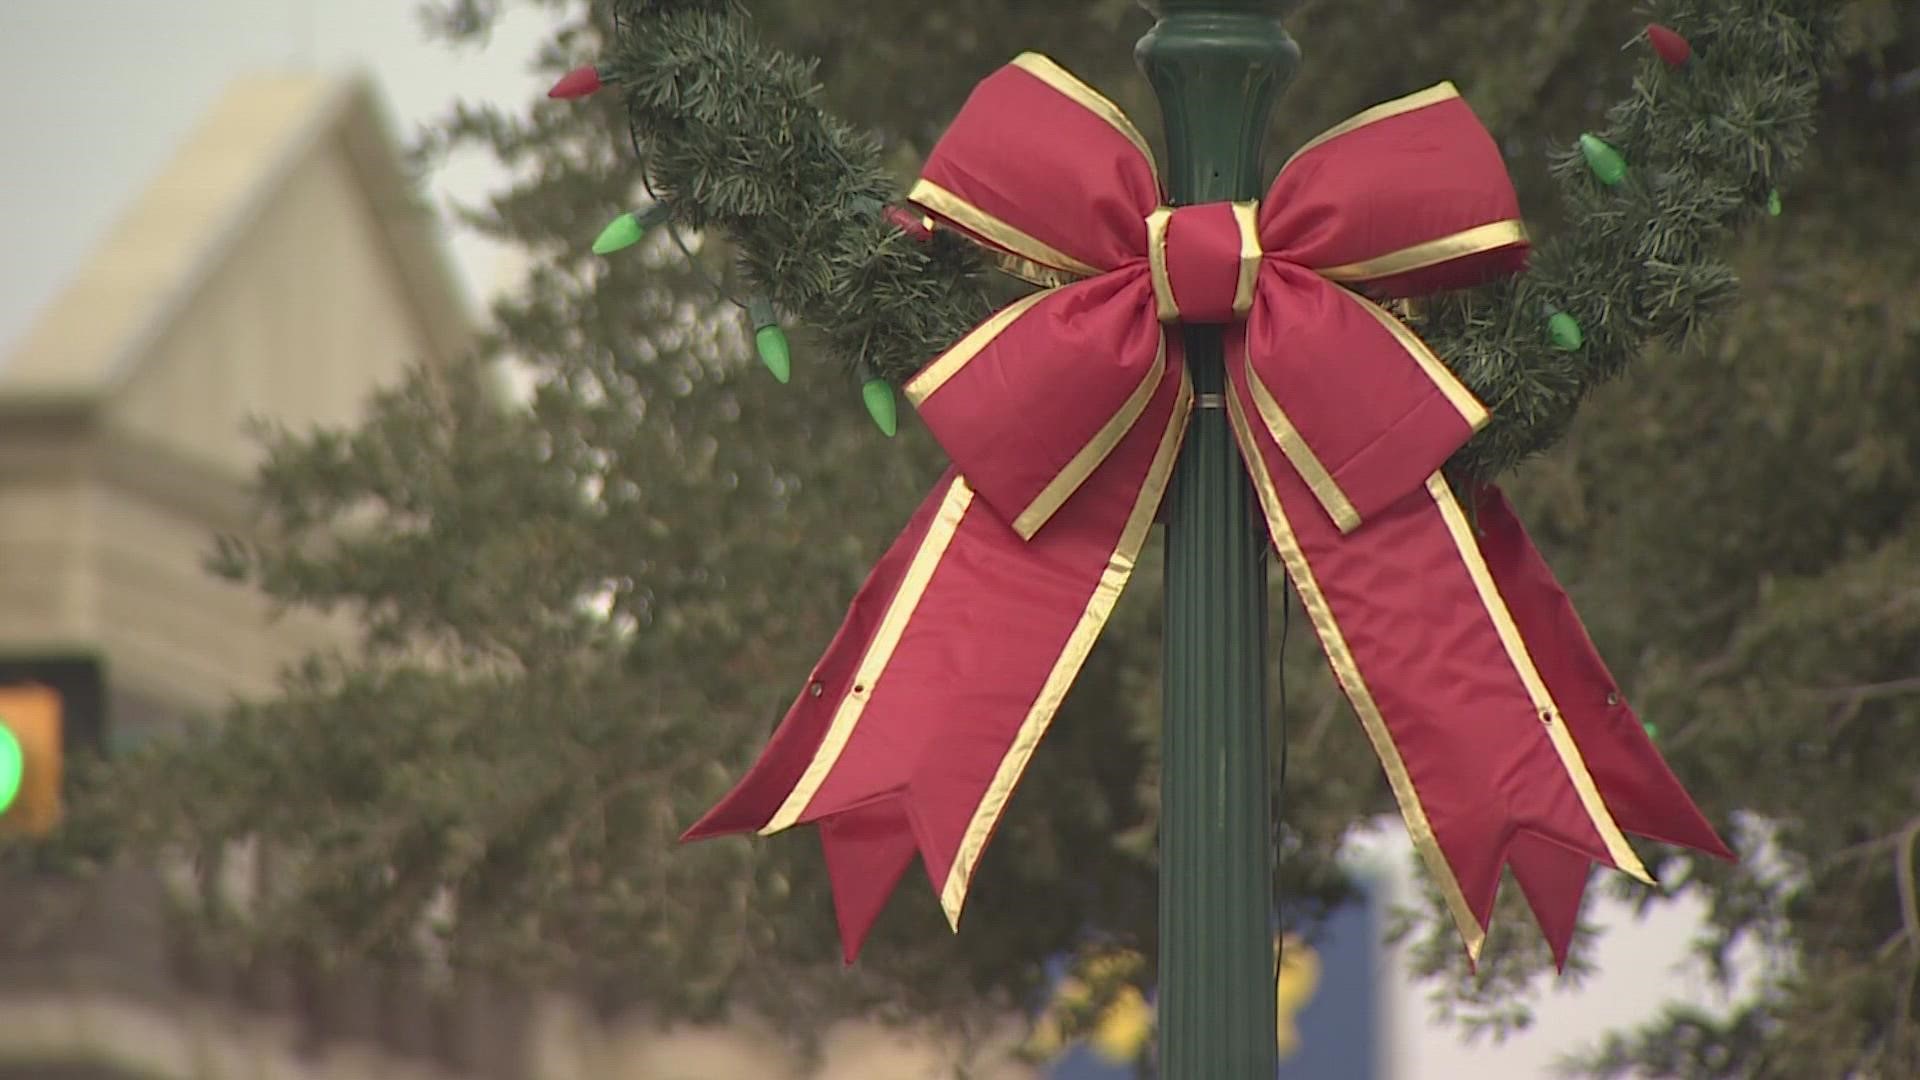 Christmas is one of many holiday celebrations kicking off around North Texas.